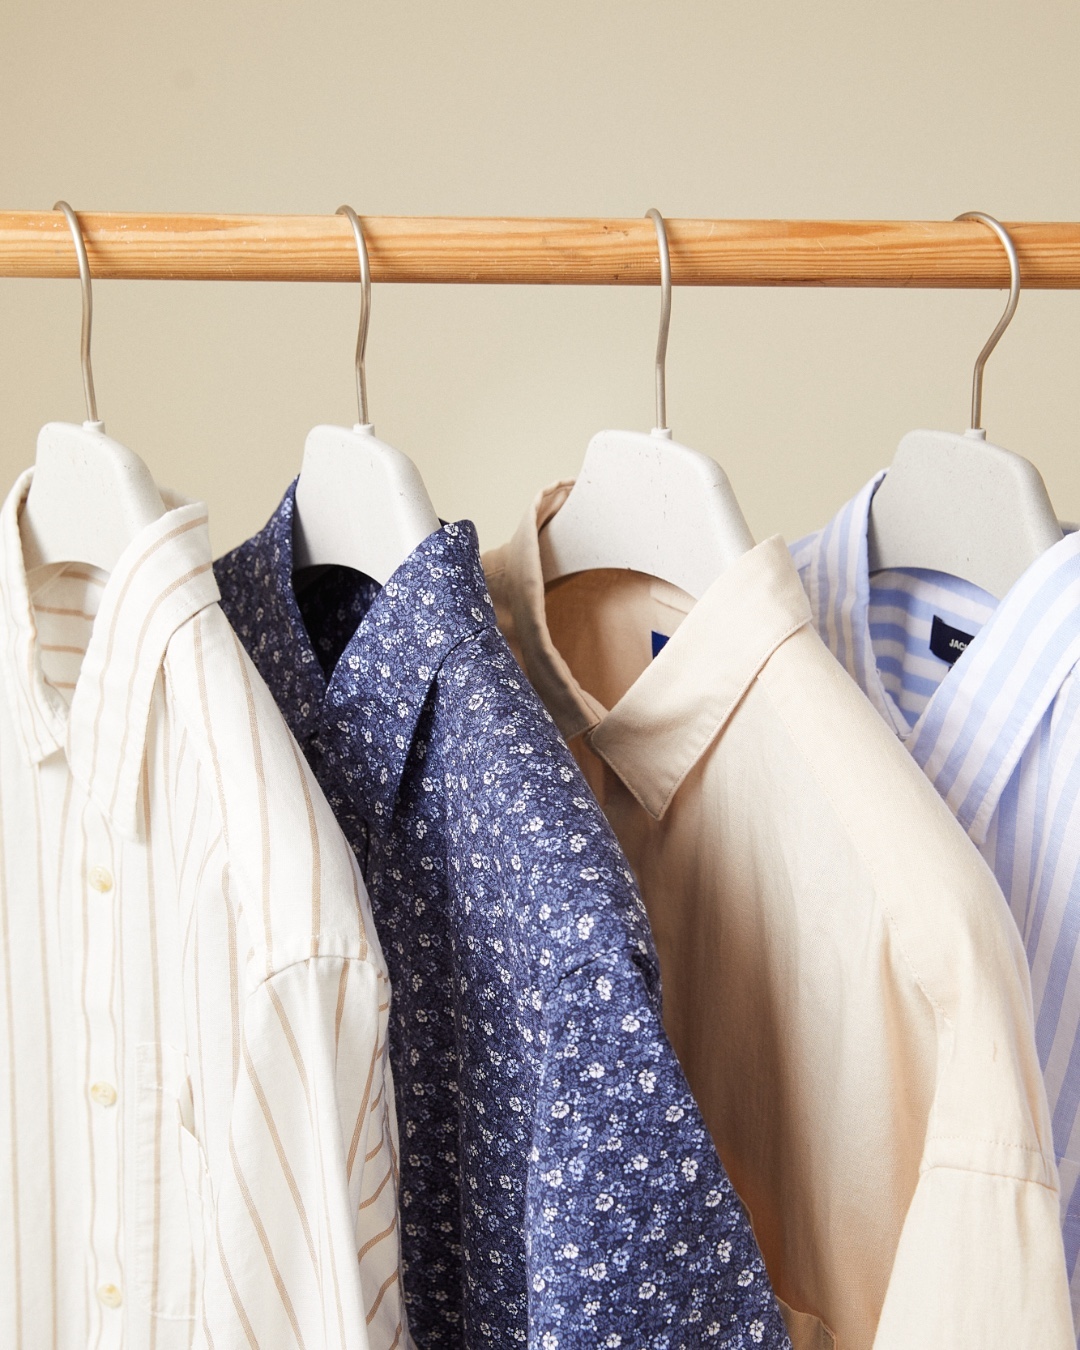 close-up image of four dress shirts hanging on hangers. they are white with pink stripes, paisley, peach and white with blue stripes